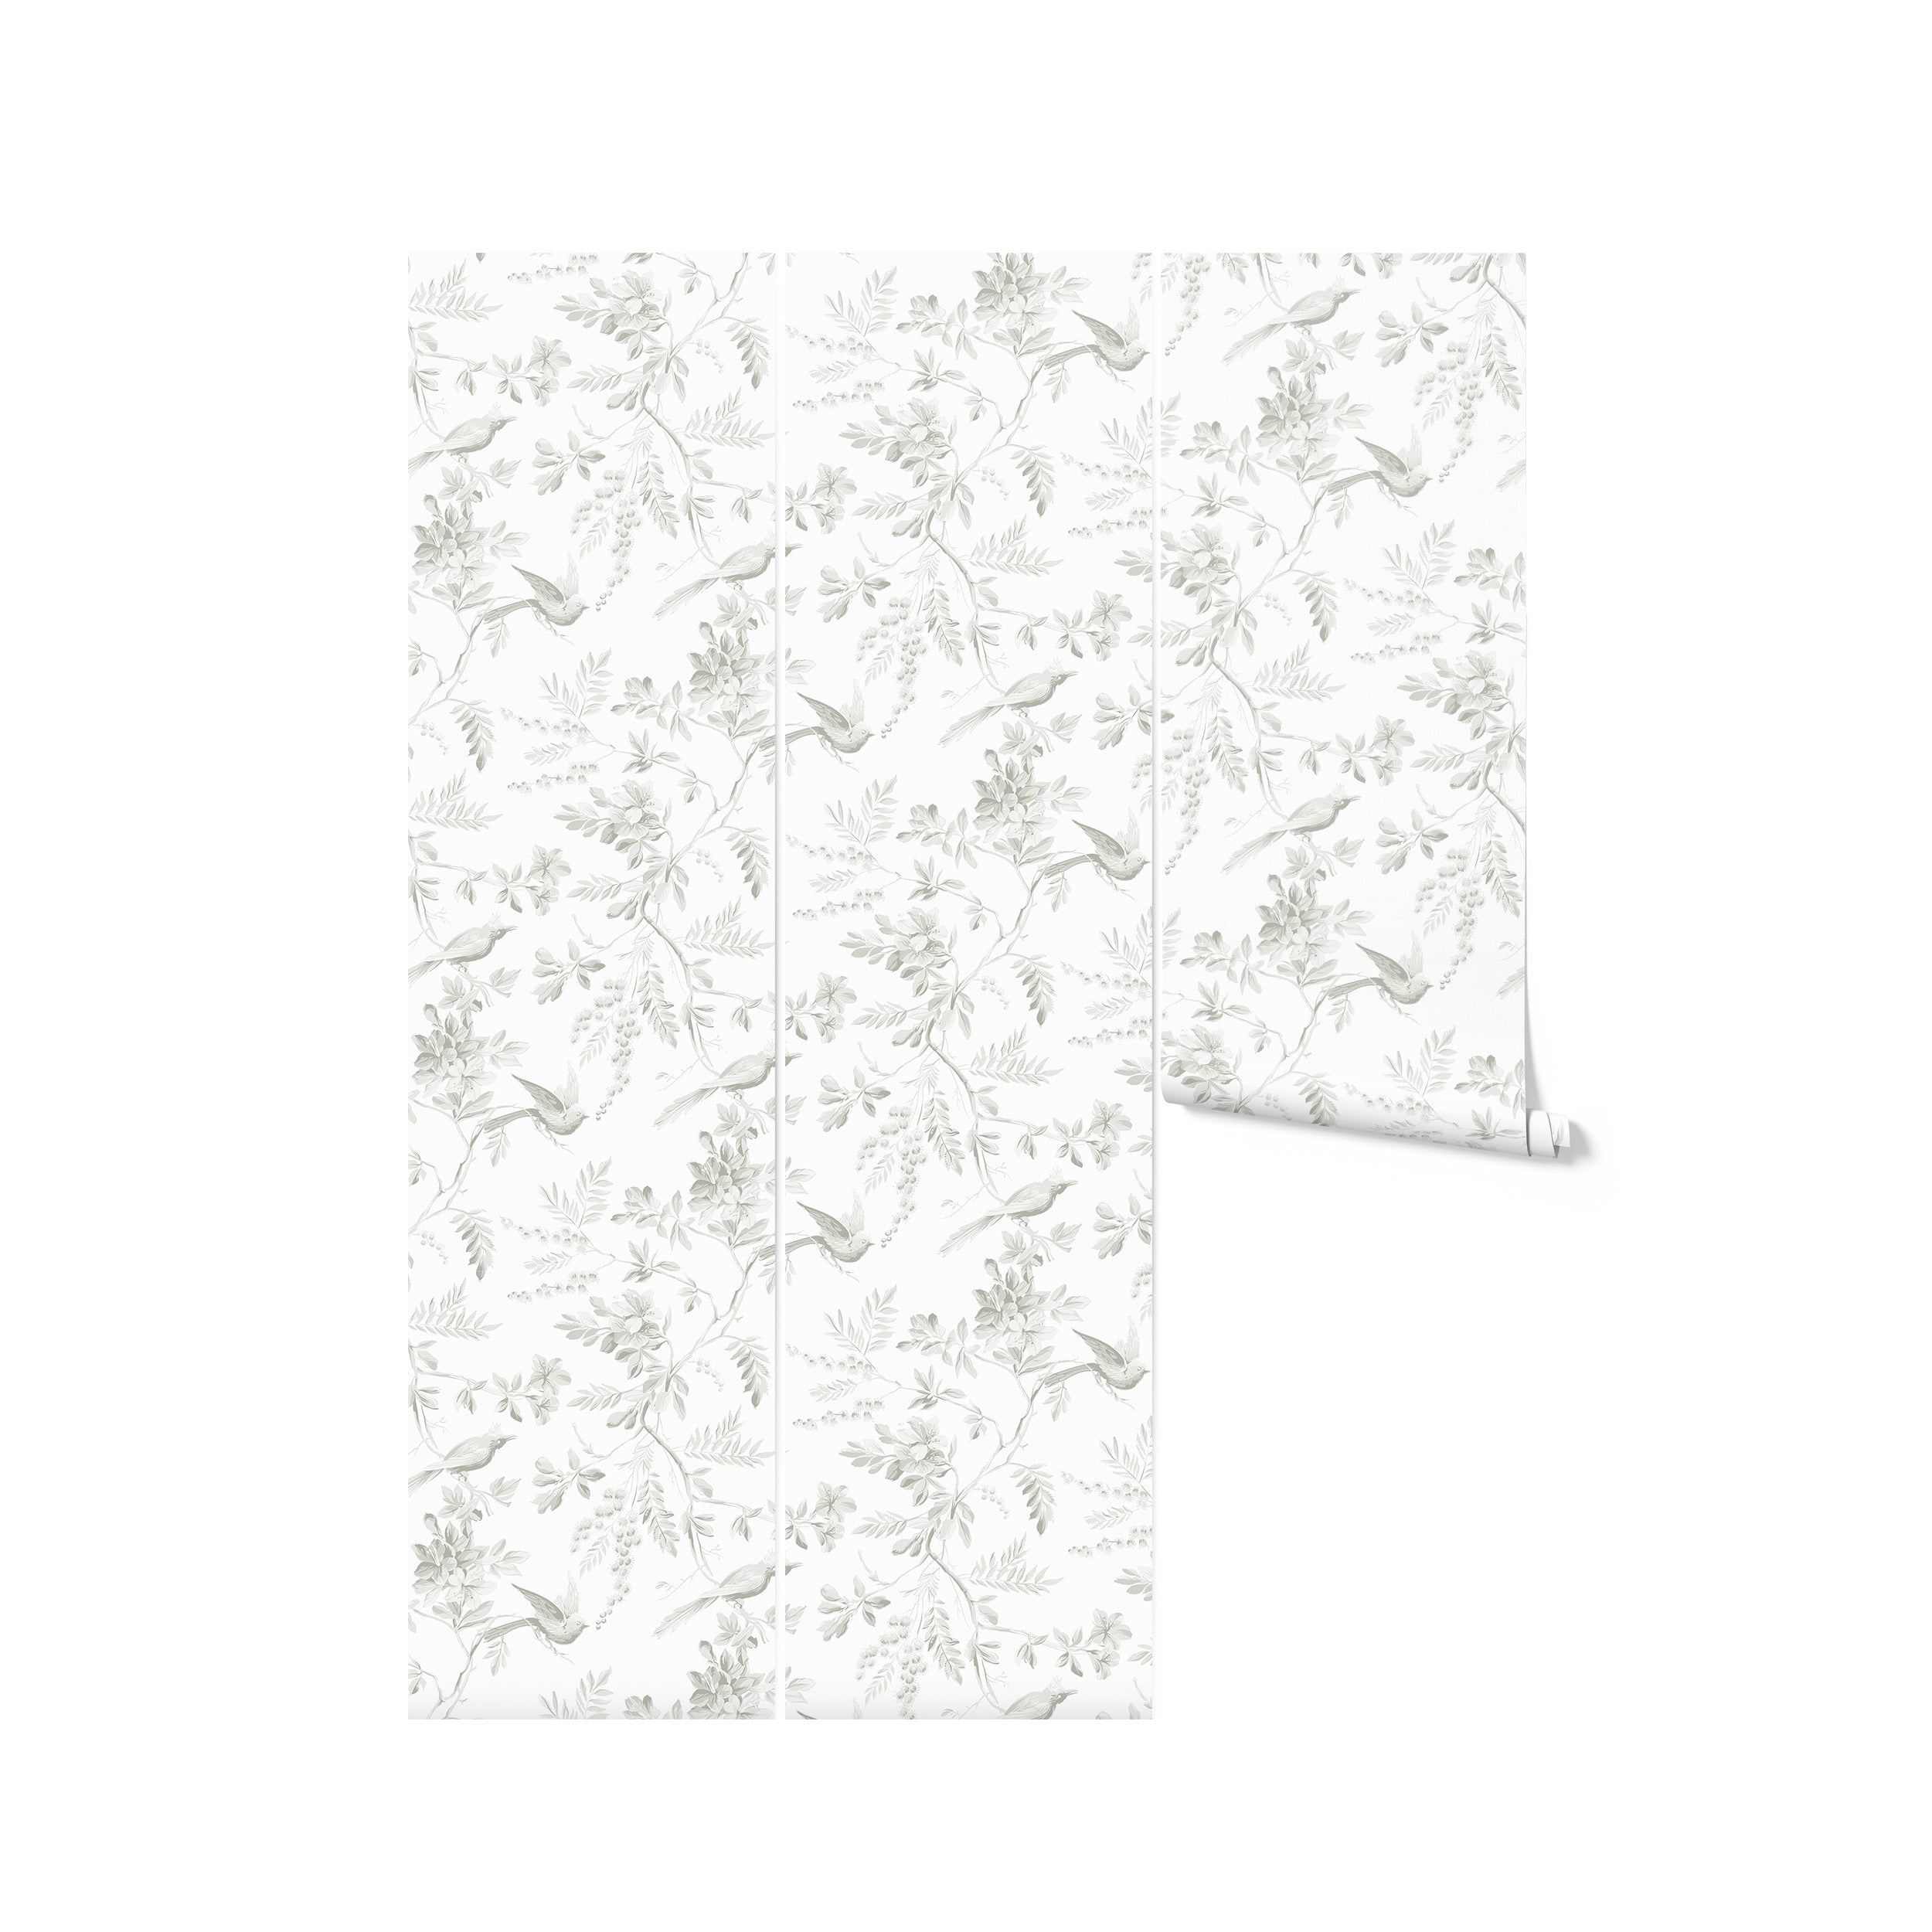 A roll of 'Blossoming Birds Wallpaper' unfurled to display an elegant pattern of birds and foliage. The soft green botanicals and birds on a white background create a fresh and airy feel, ideal for bringing a natural and peaceful ambiance to a room.